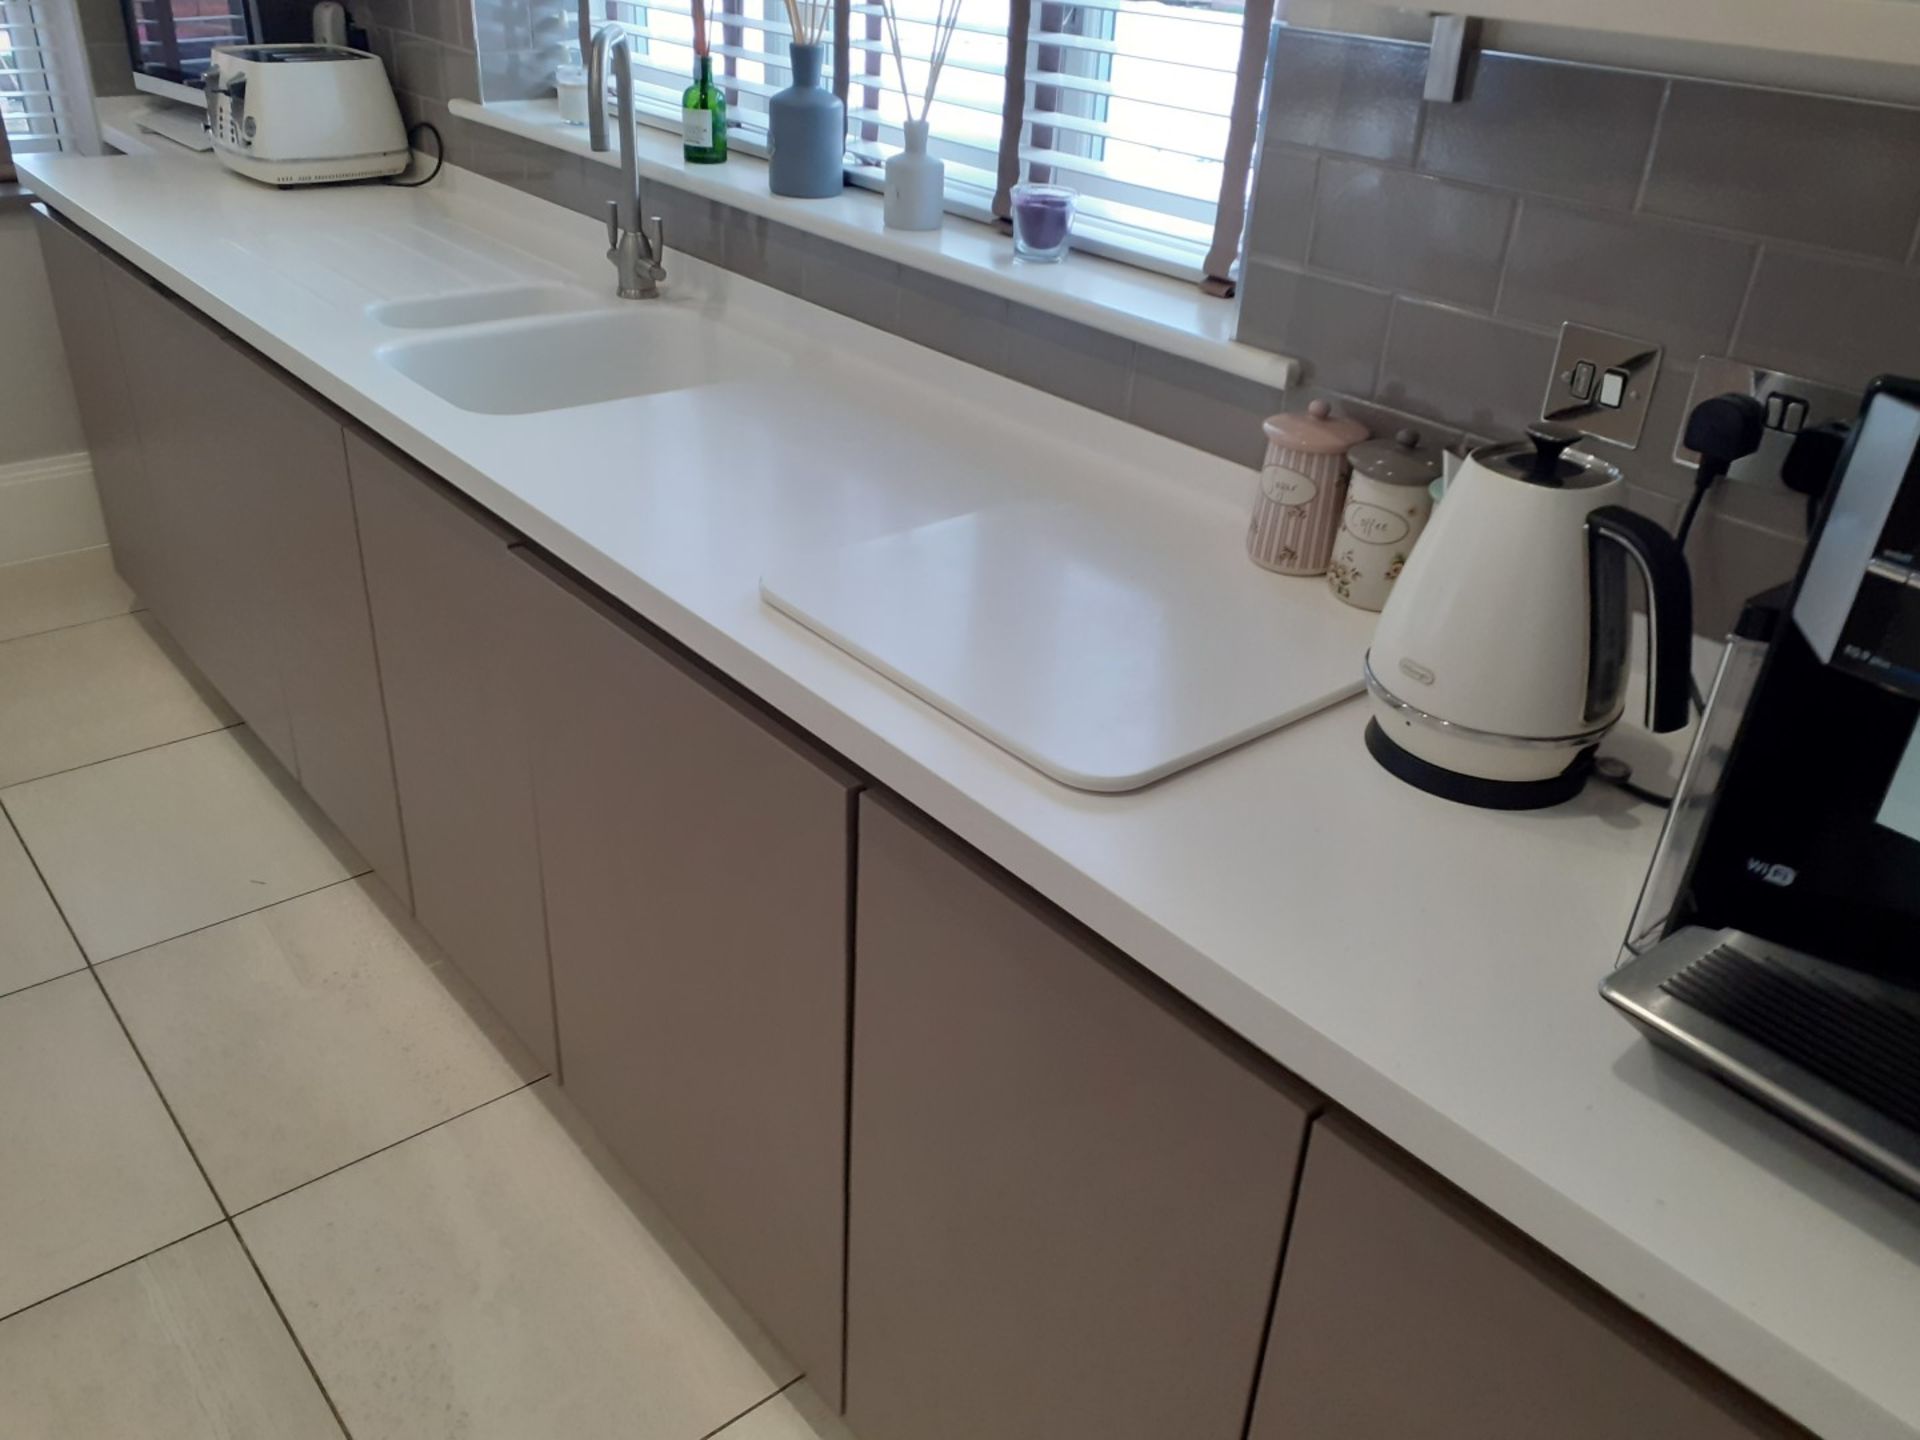 1 x SieMatic Handleless Fitted Kitchen With Intergrated NEFF Appliances, Corian Worktops And Island - Image 20 of 92